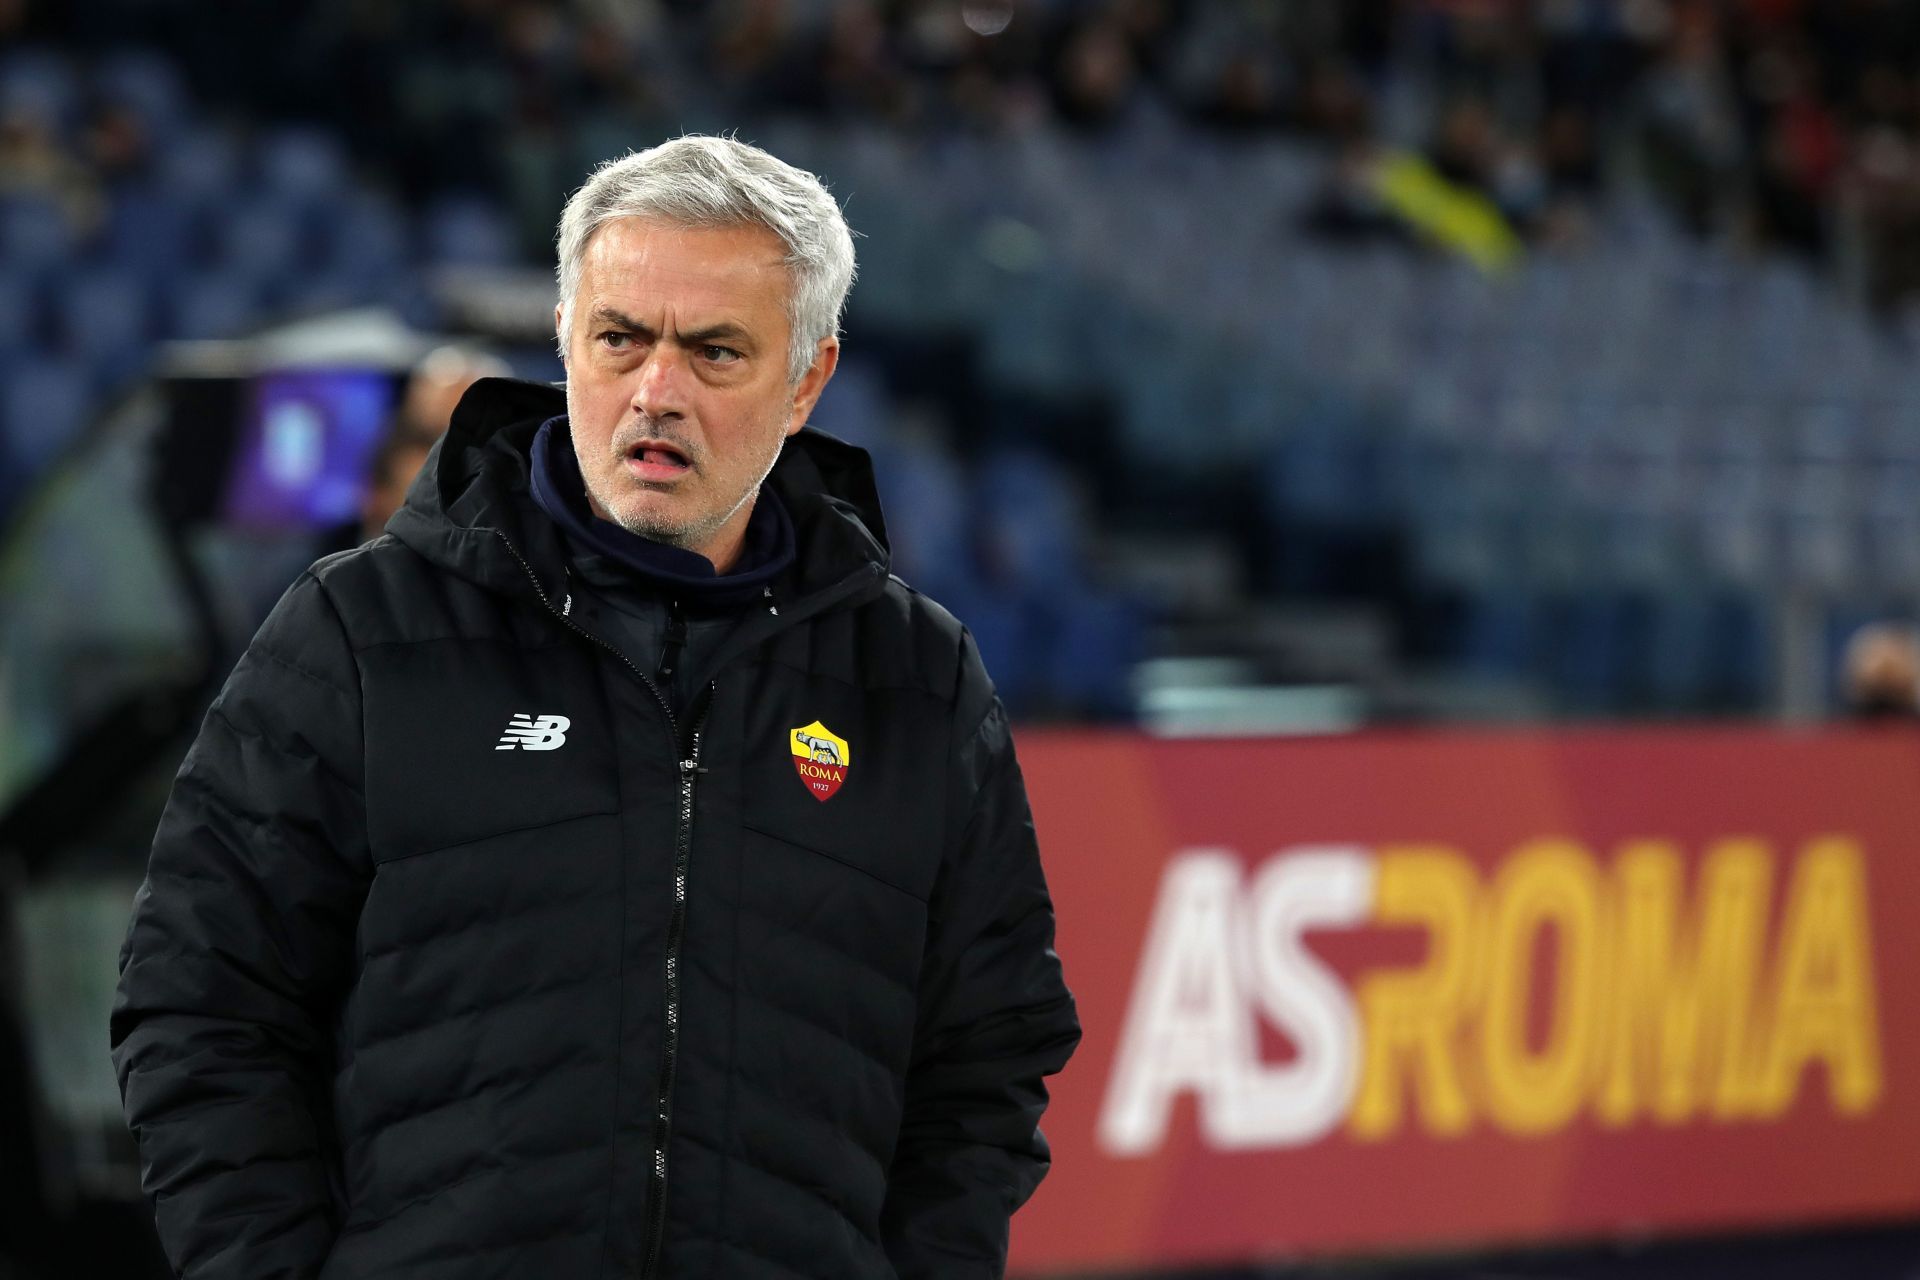 Roma is the least strongest team that Mourinho has been a part of lately